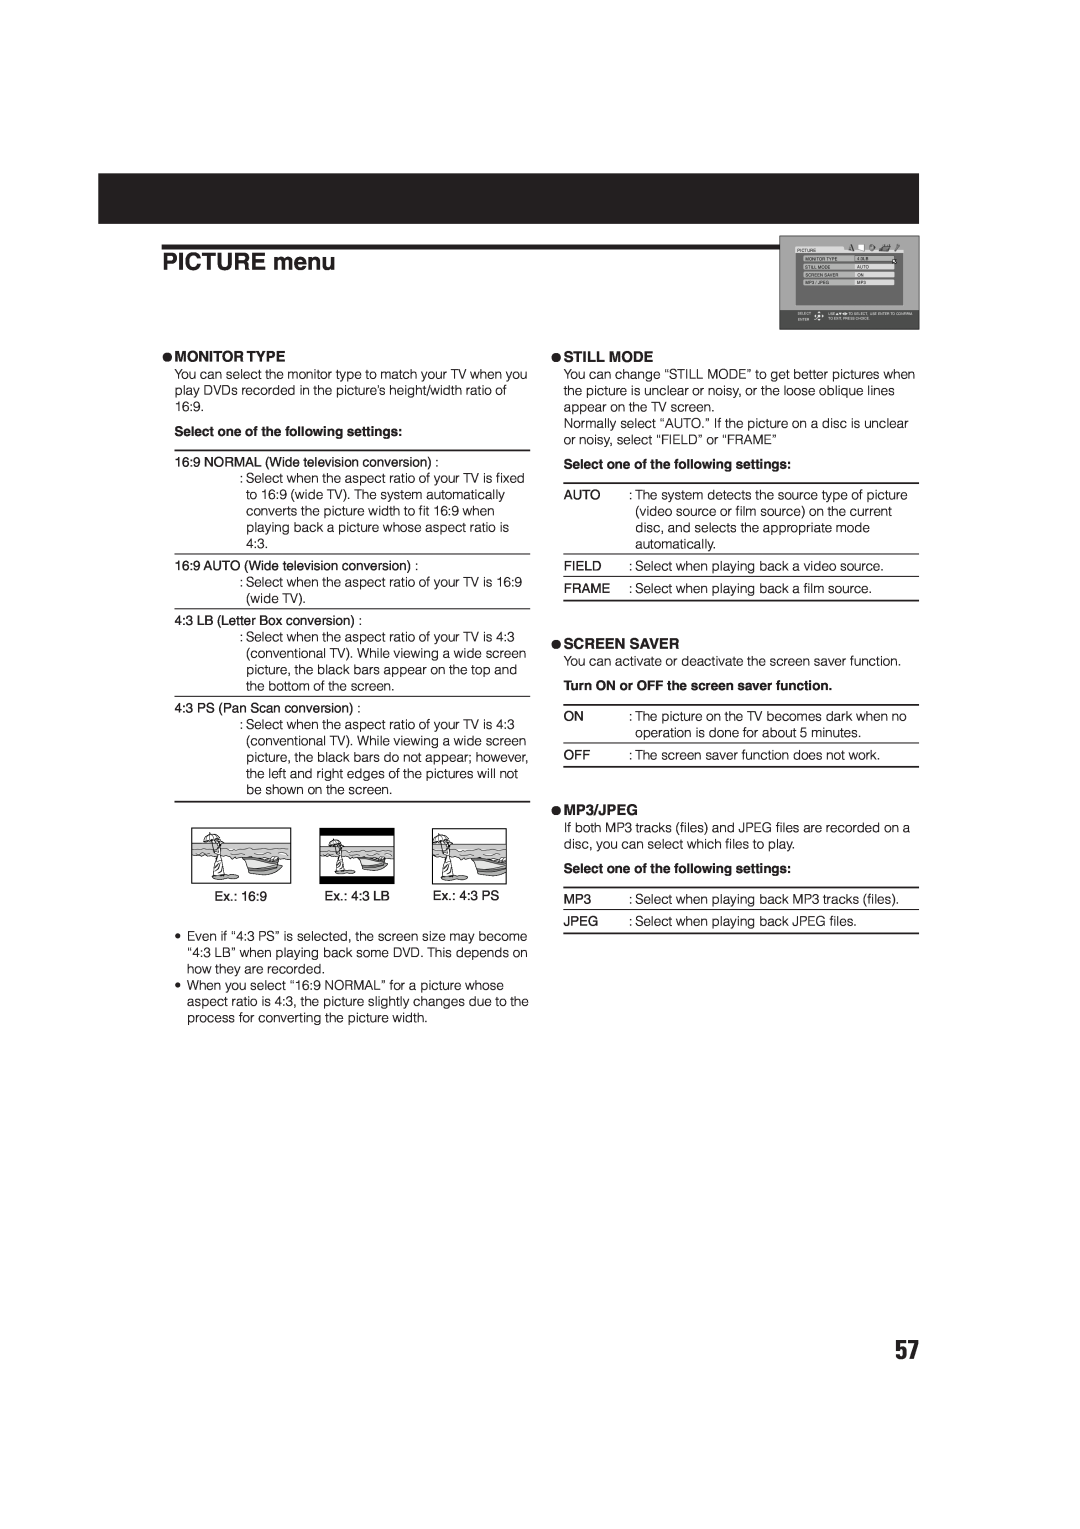 JVC SP-XSA75 PICTURE menu, ¶Monitor Type, ¶Still Mode, ¶Screen Saver, ¶MP3/JPEG, Select one of the following settings 